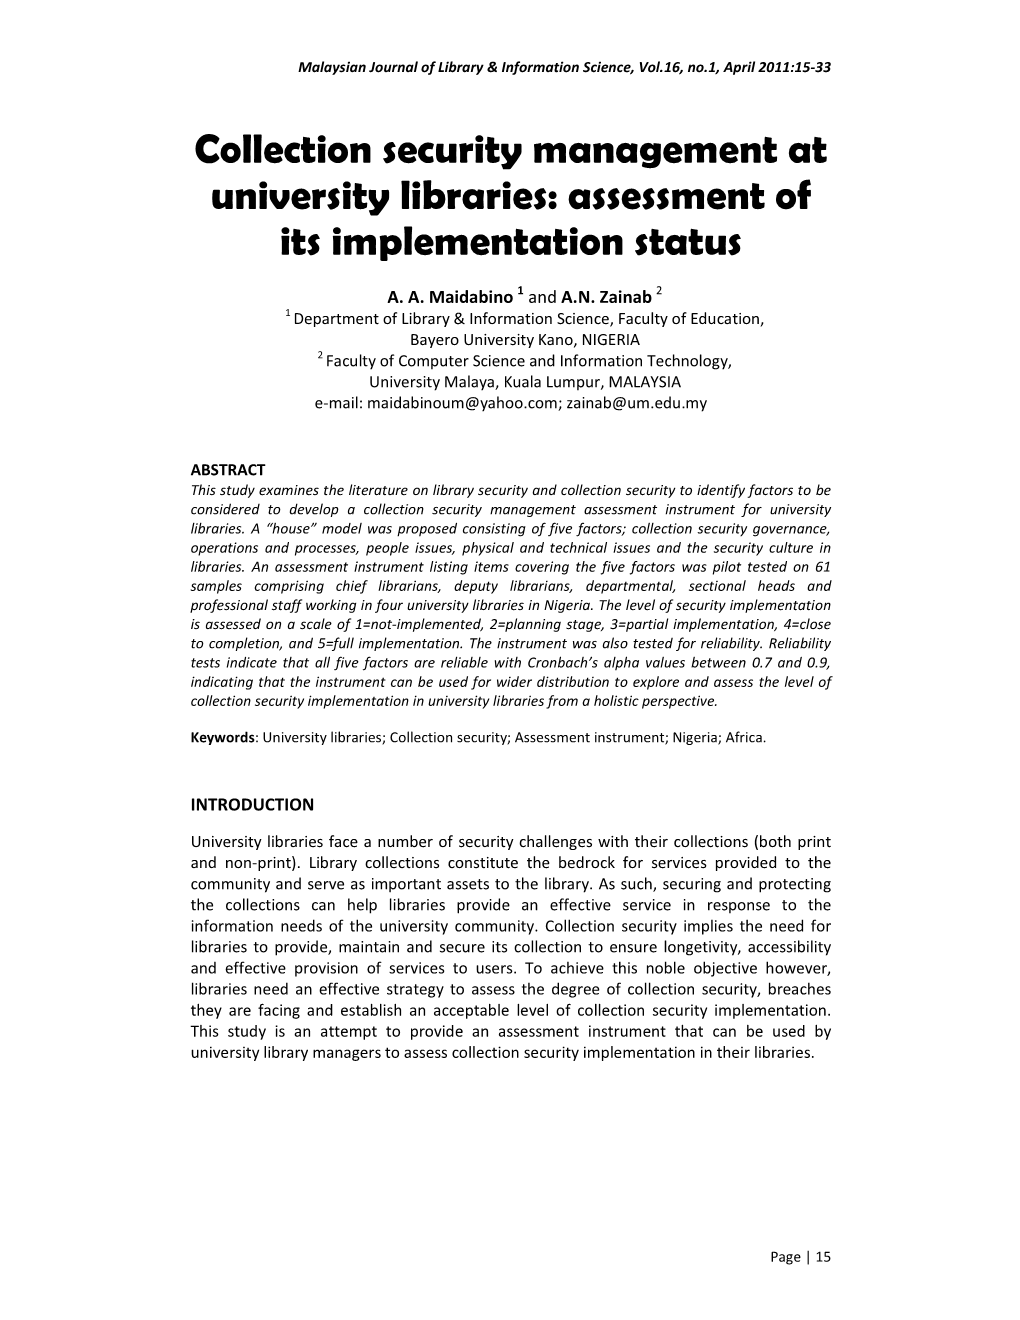 Collection Security Management at University Libraries: Assessment of Its Implementation Status